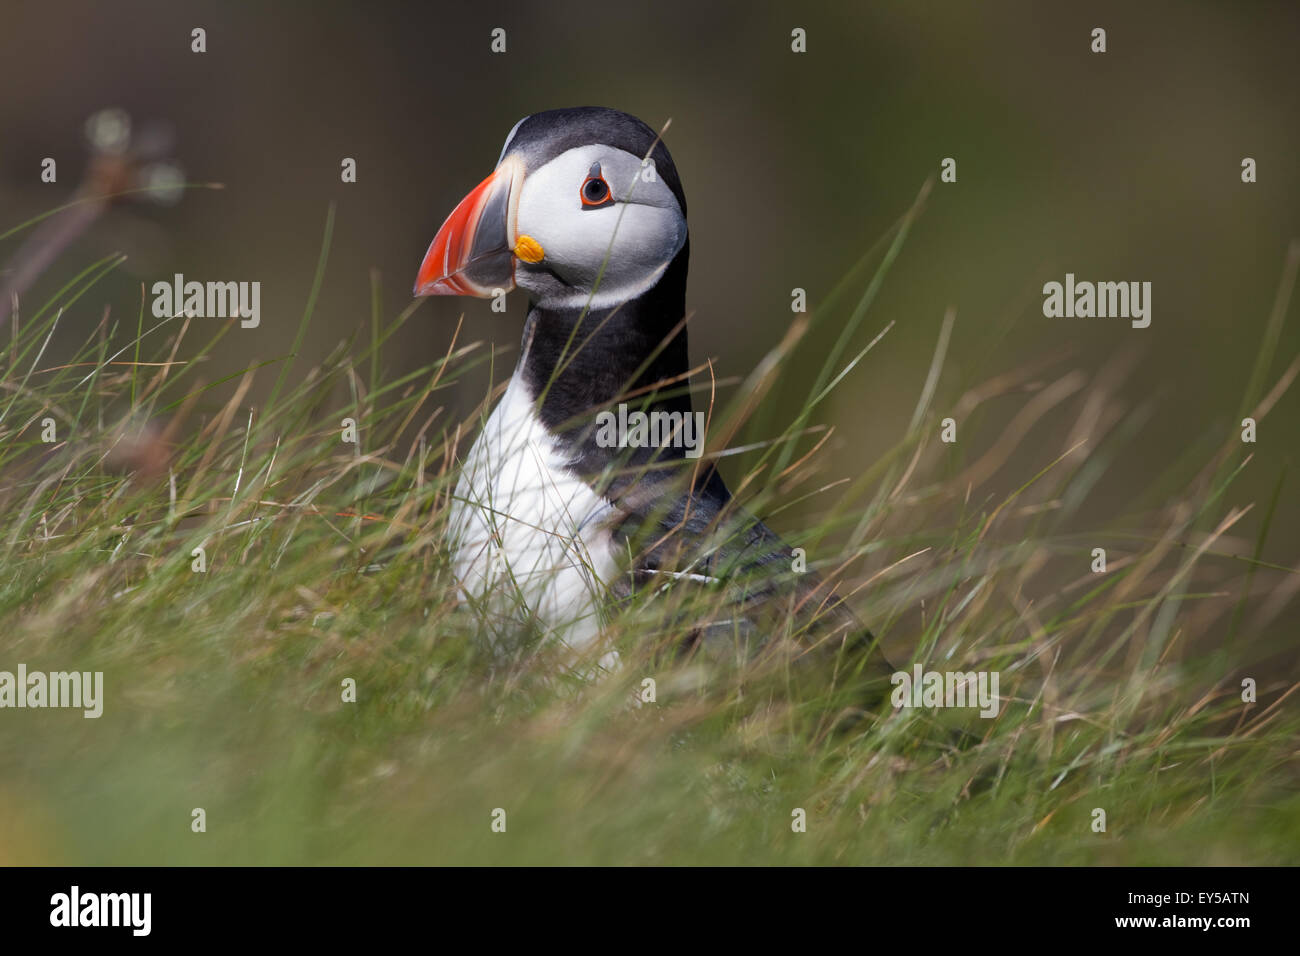 Puffin (Fratercula arctica). Breeding plumage. About to go down a nesting hole; obscured. June. Staffa. Inner Hebrides. SCOTLAND Stock Photo